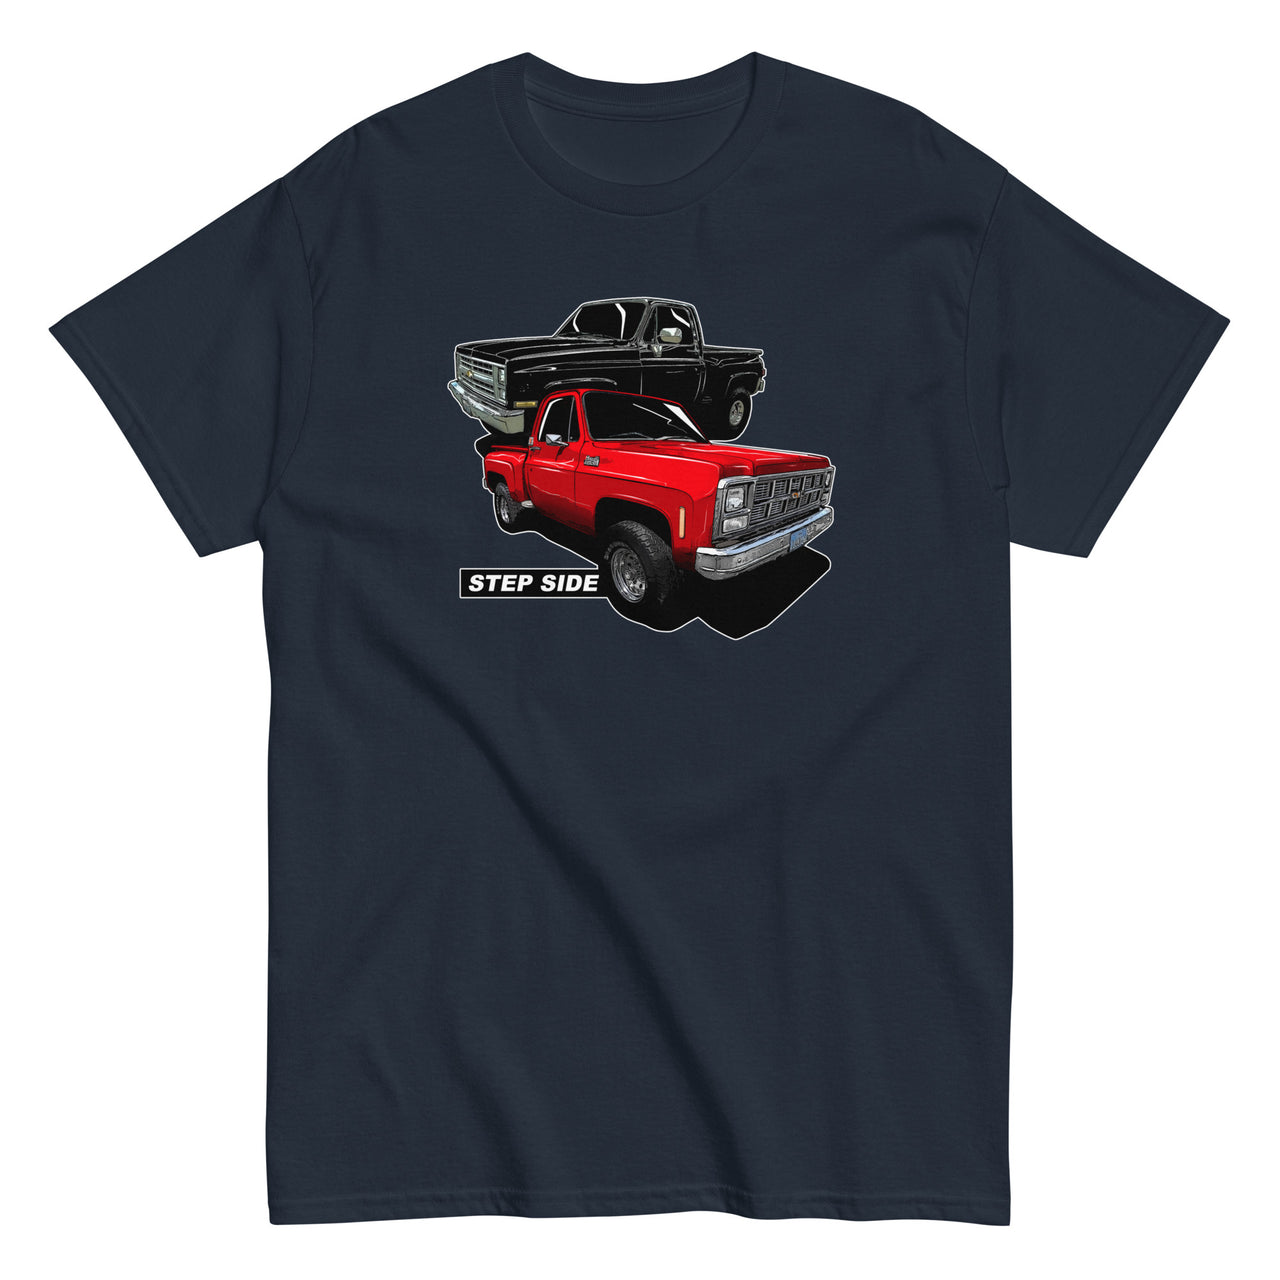 Square Body Step-Side T-Shirt in navy